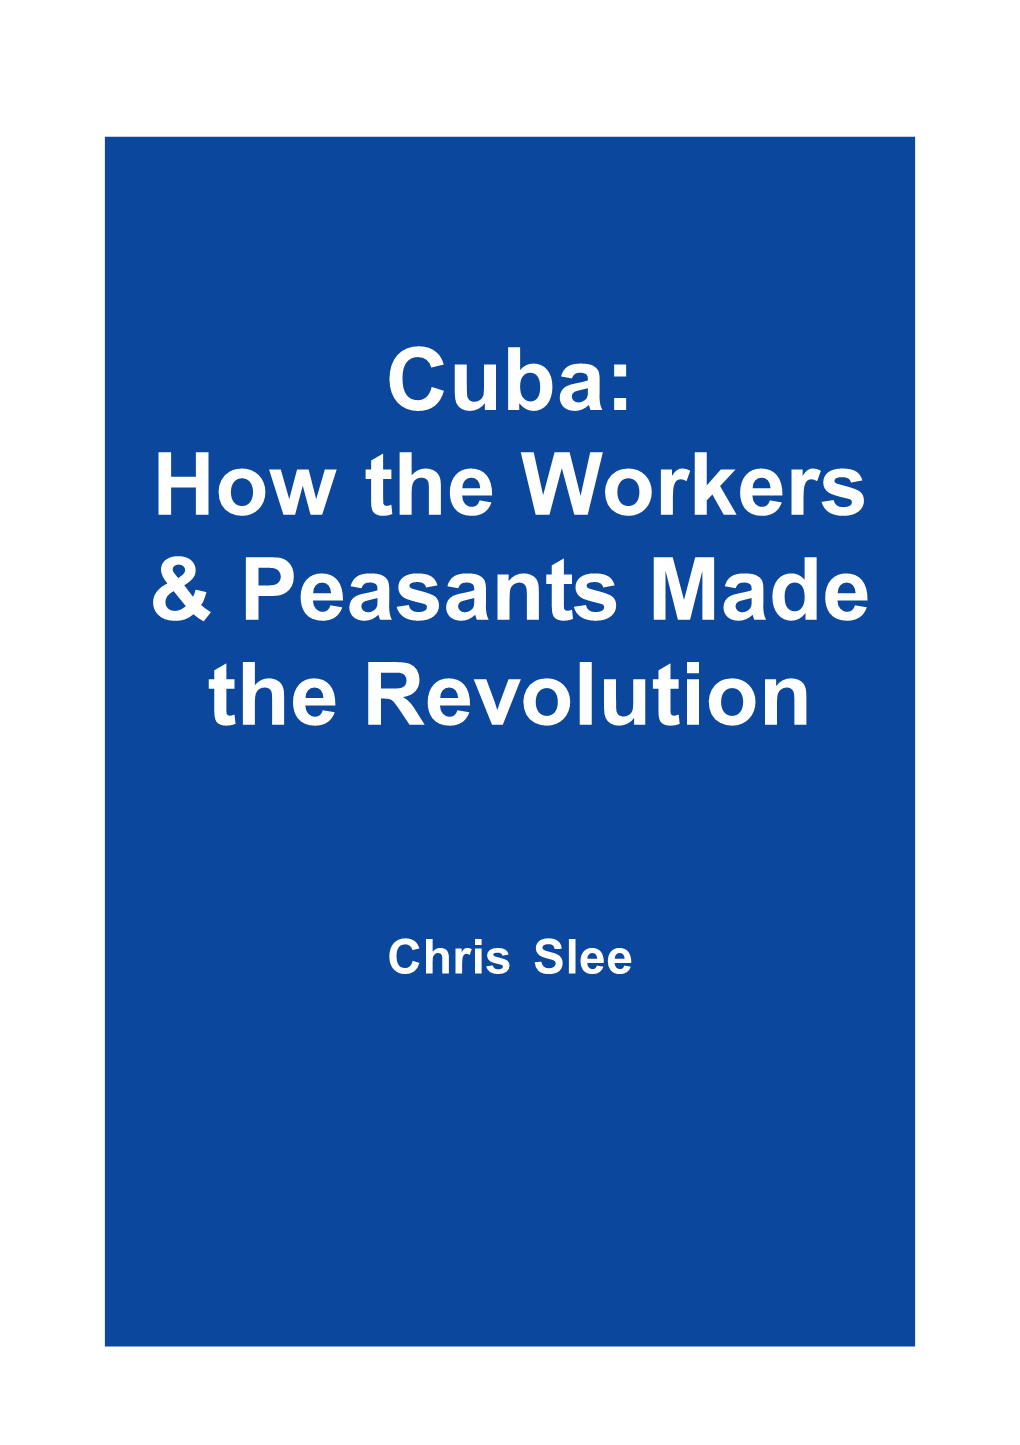 Cuba: How the Workers & Peasants Made the Revolution